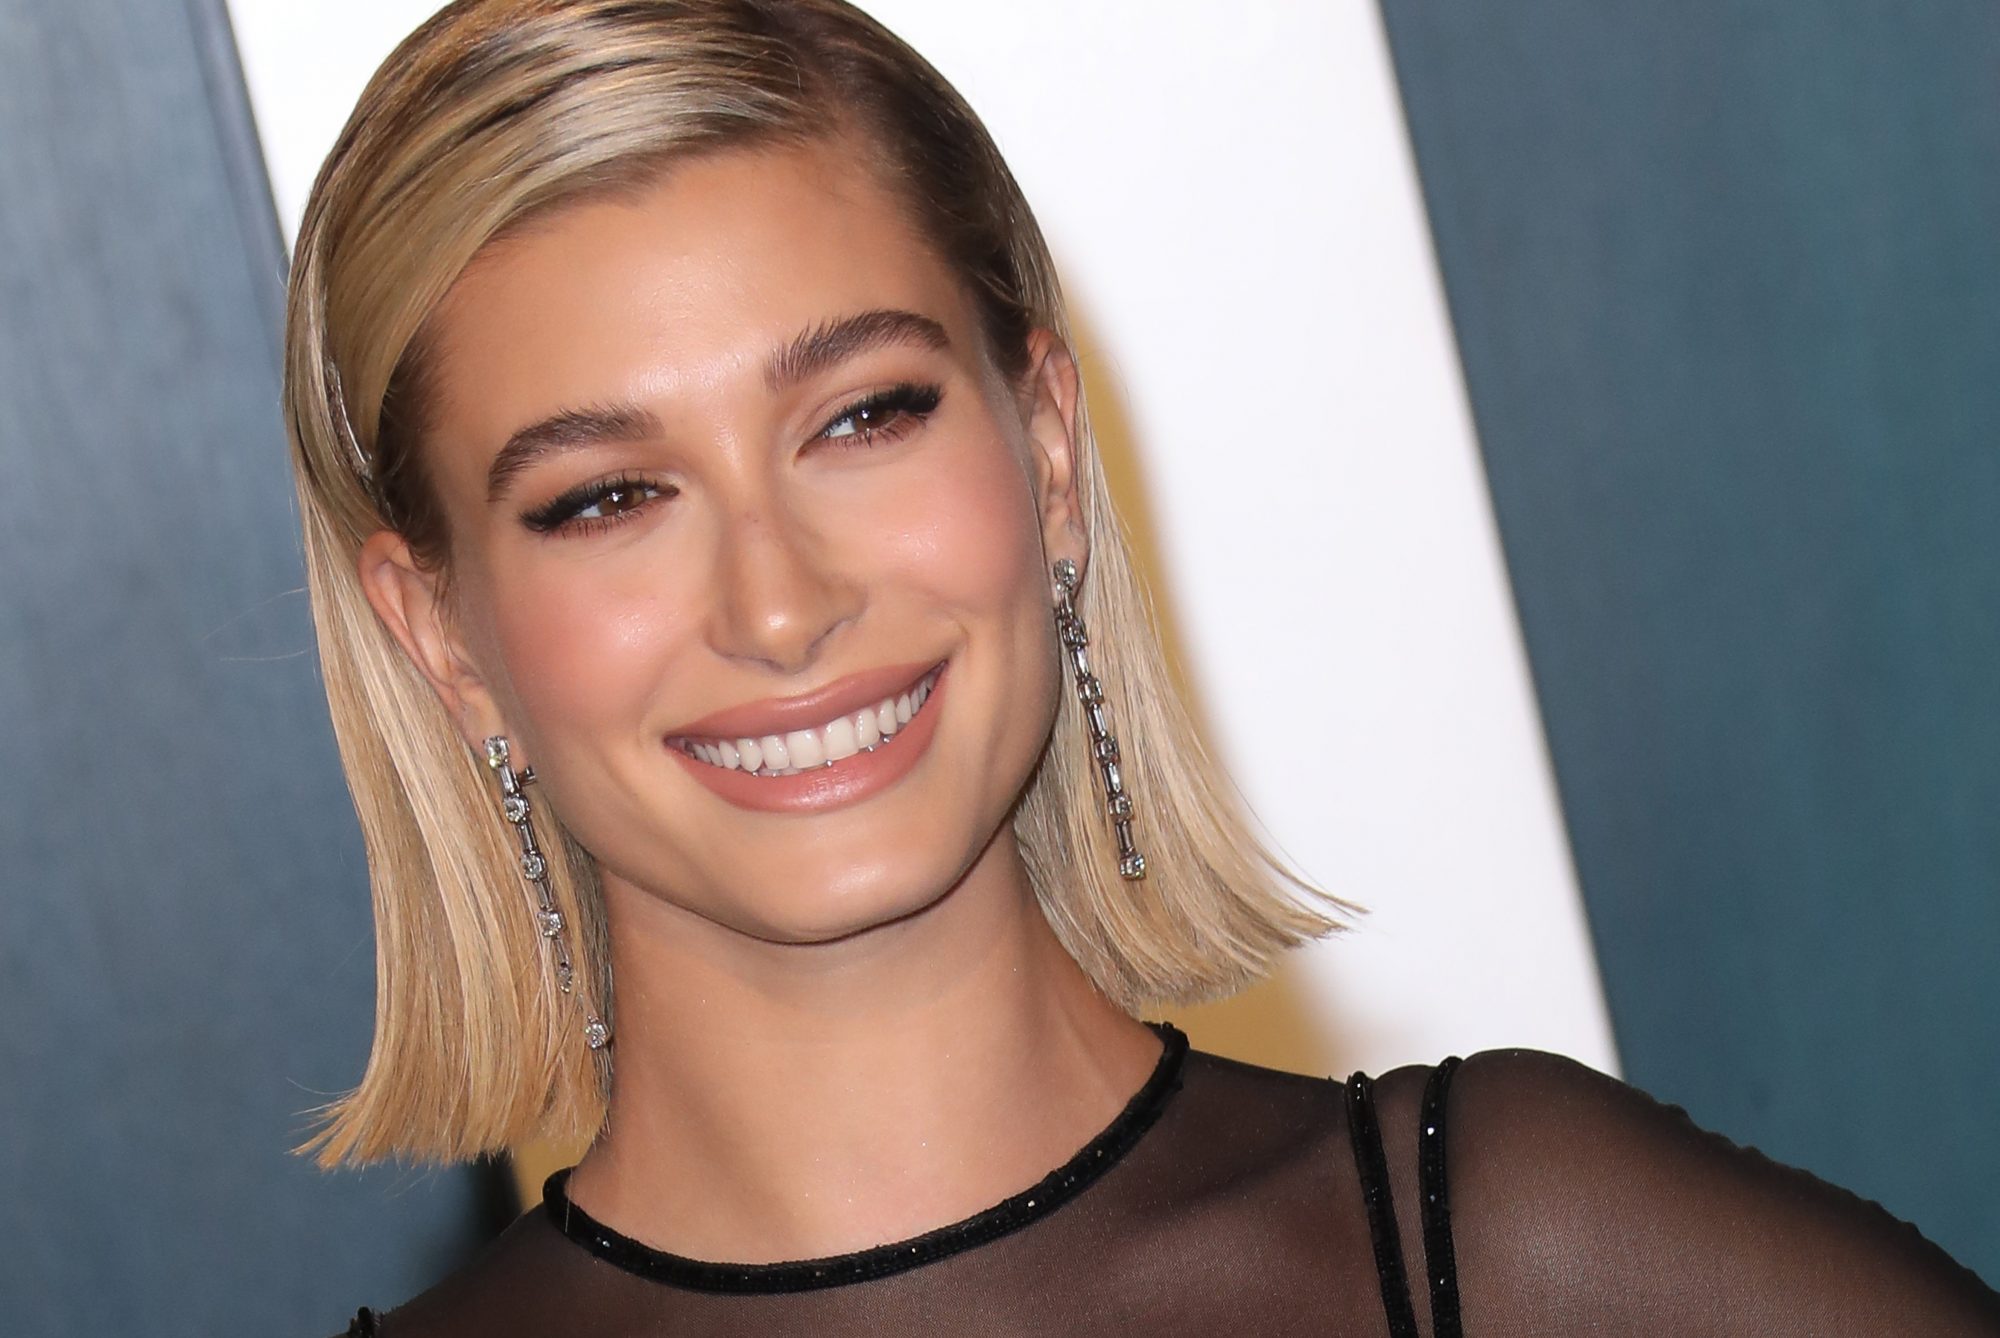 Hailey Bieber Opened Up About Why It Made Sense to Marry at Such a